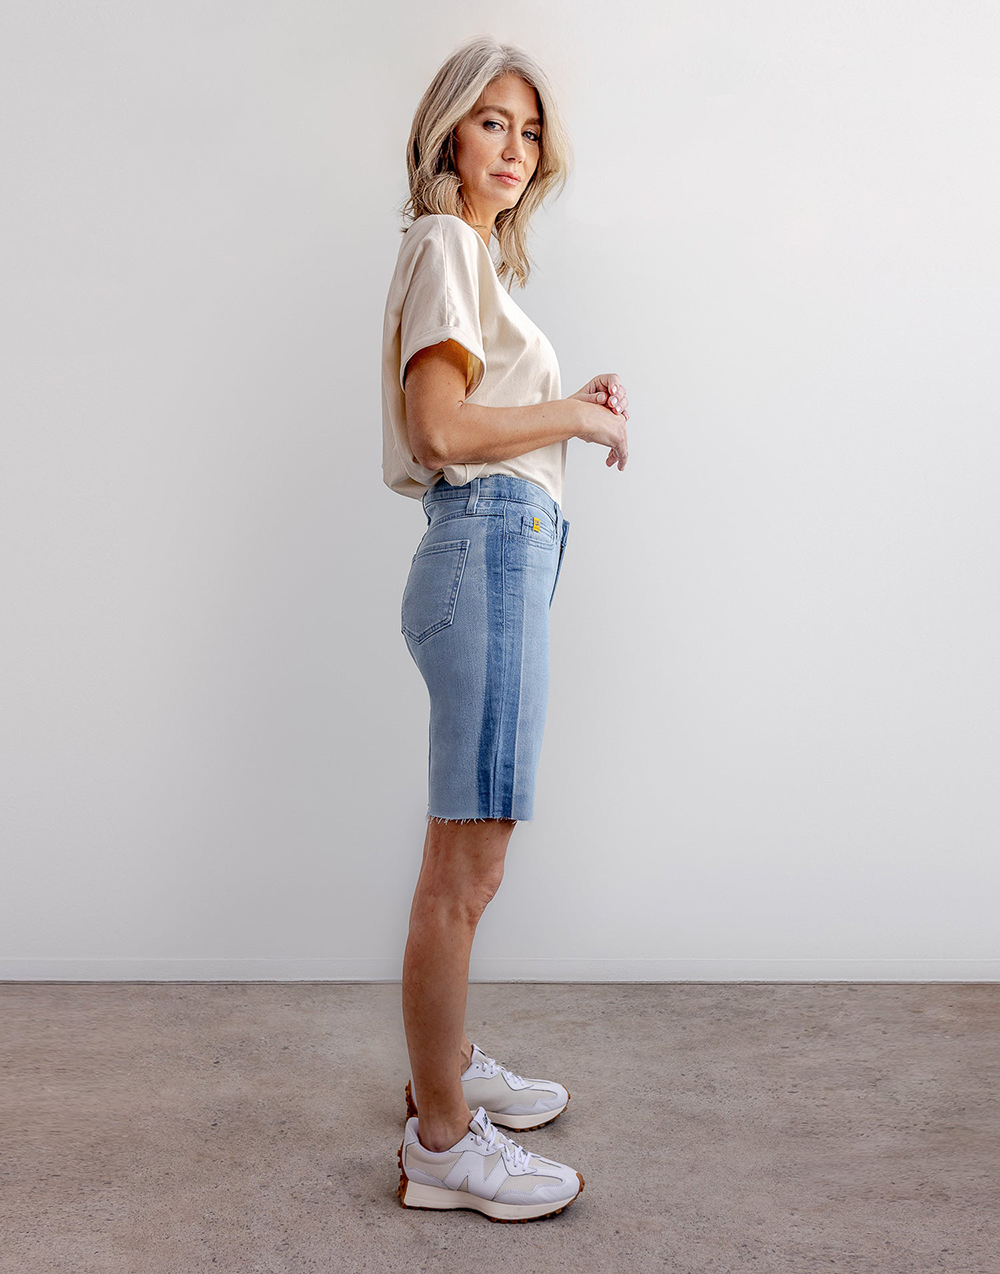 A model seen from the side wearing long denim shorts in two-tone denim from Yoga Jeans.